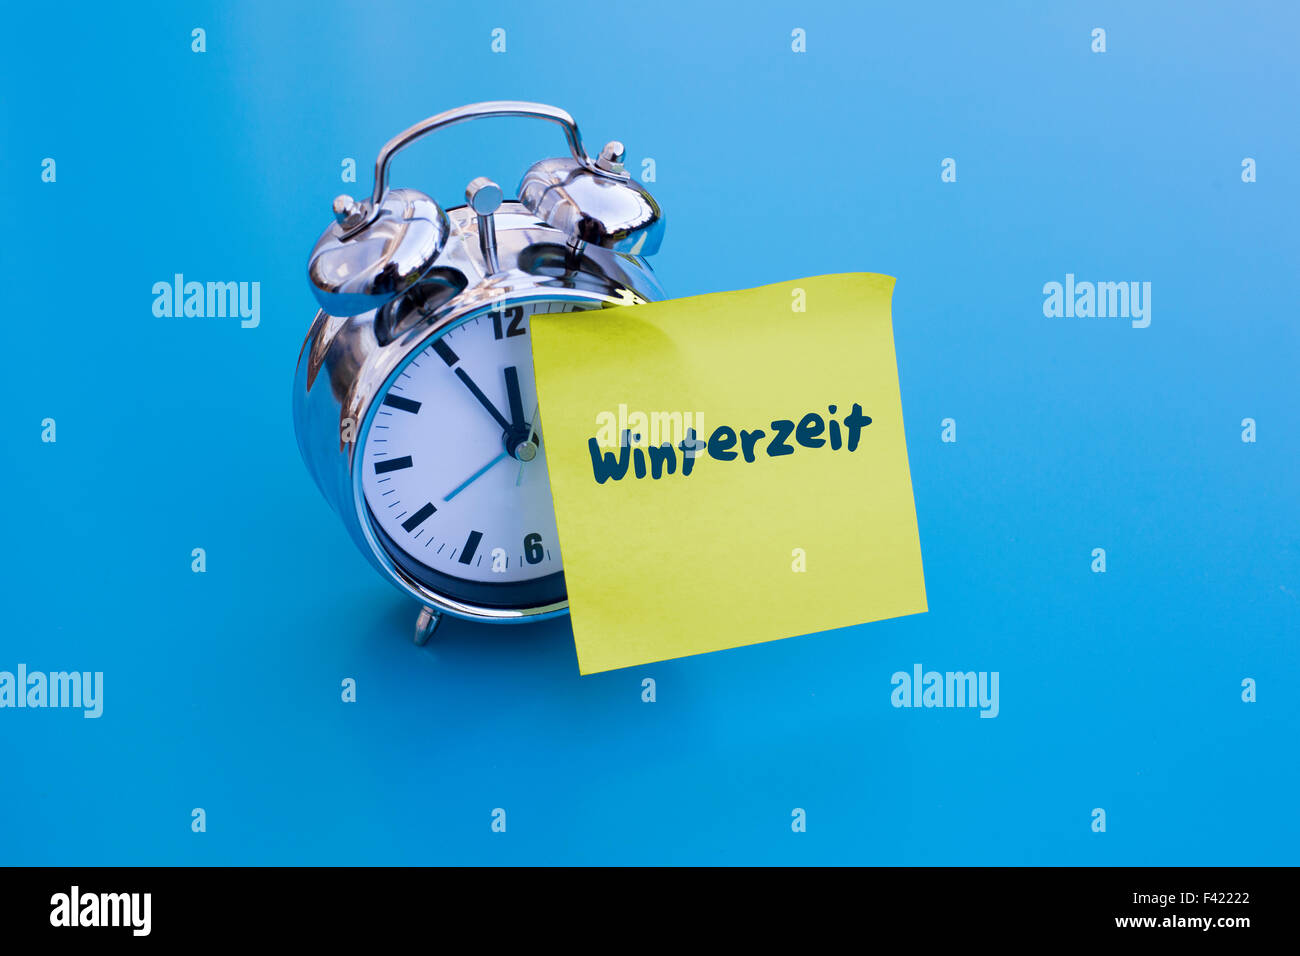 alarm clock on blue table with sticky note with german word 'Winterzeit' (winter time) Stock Photo